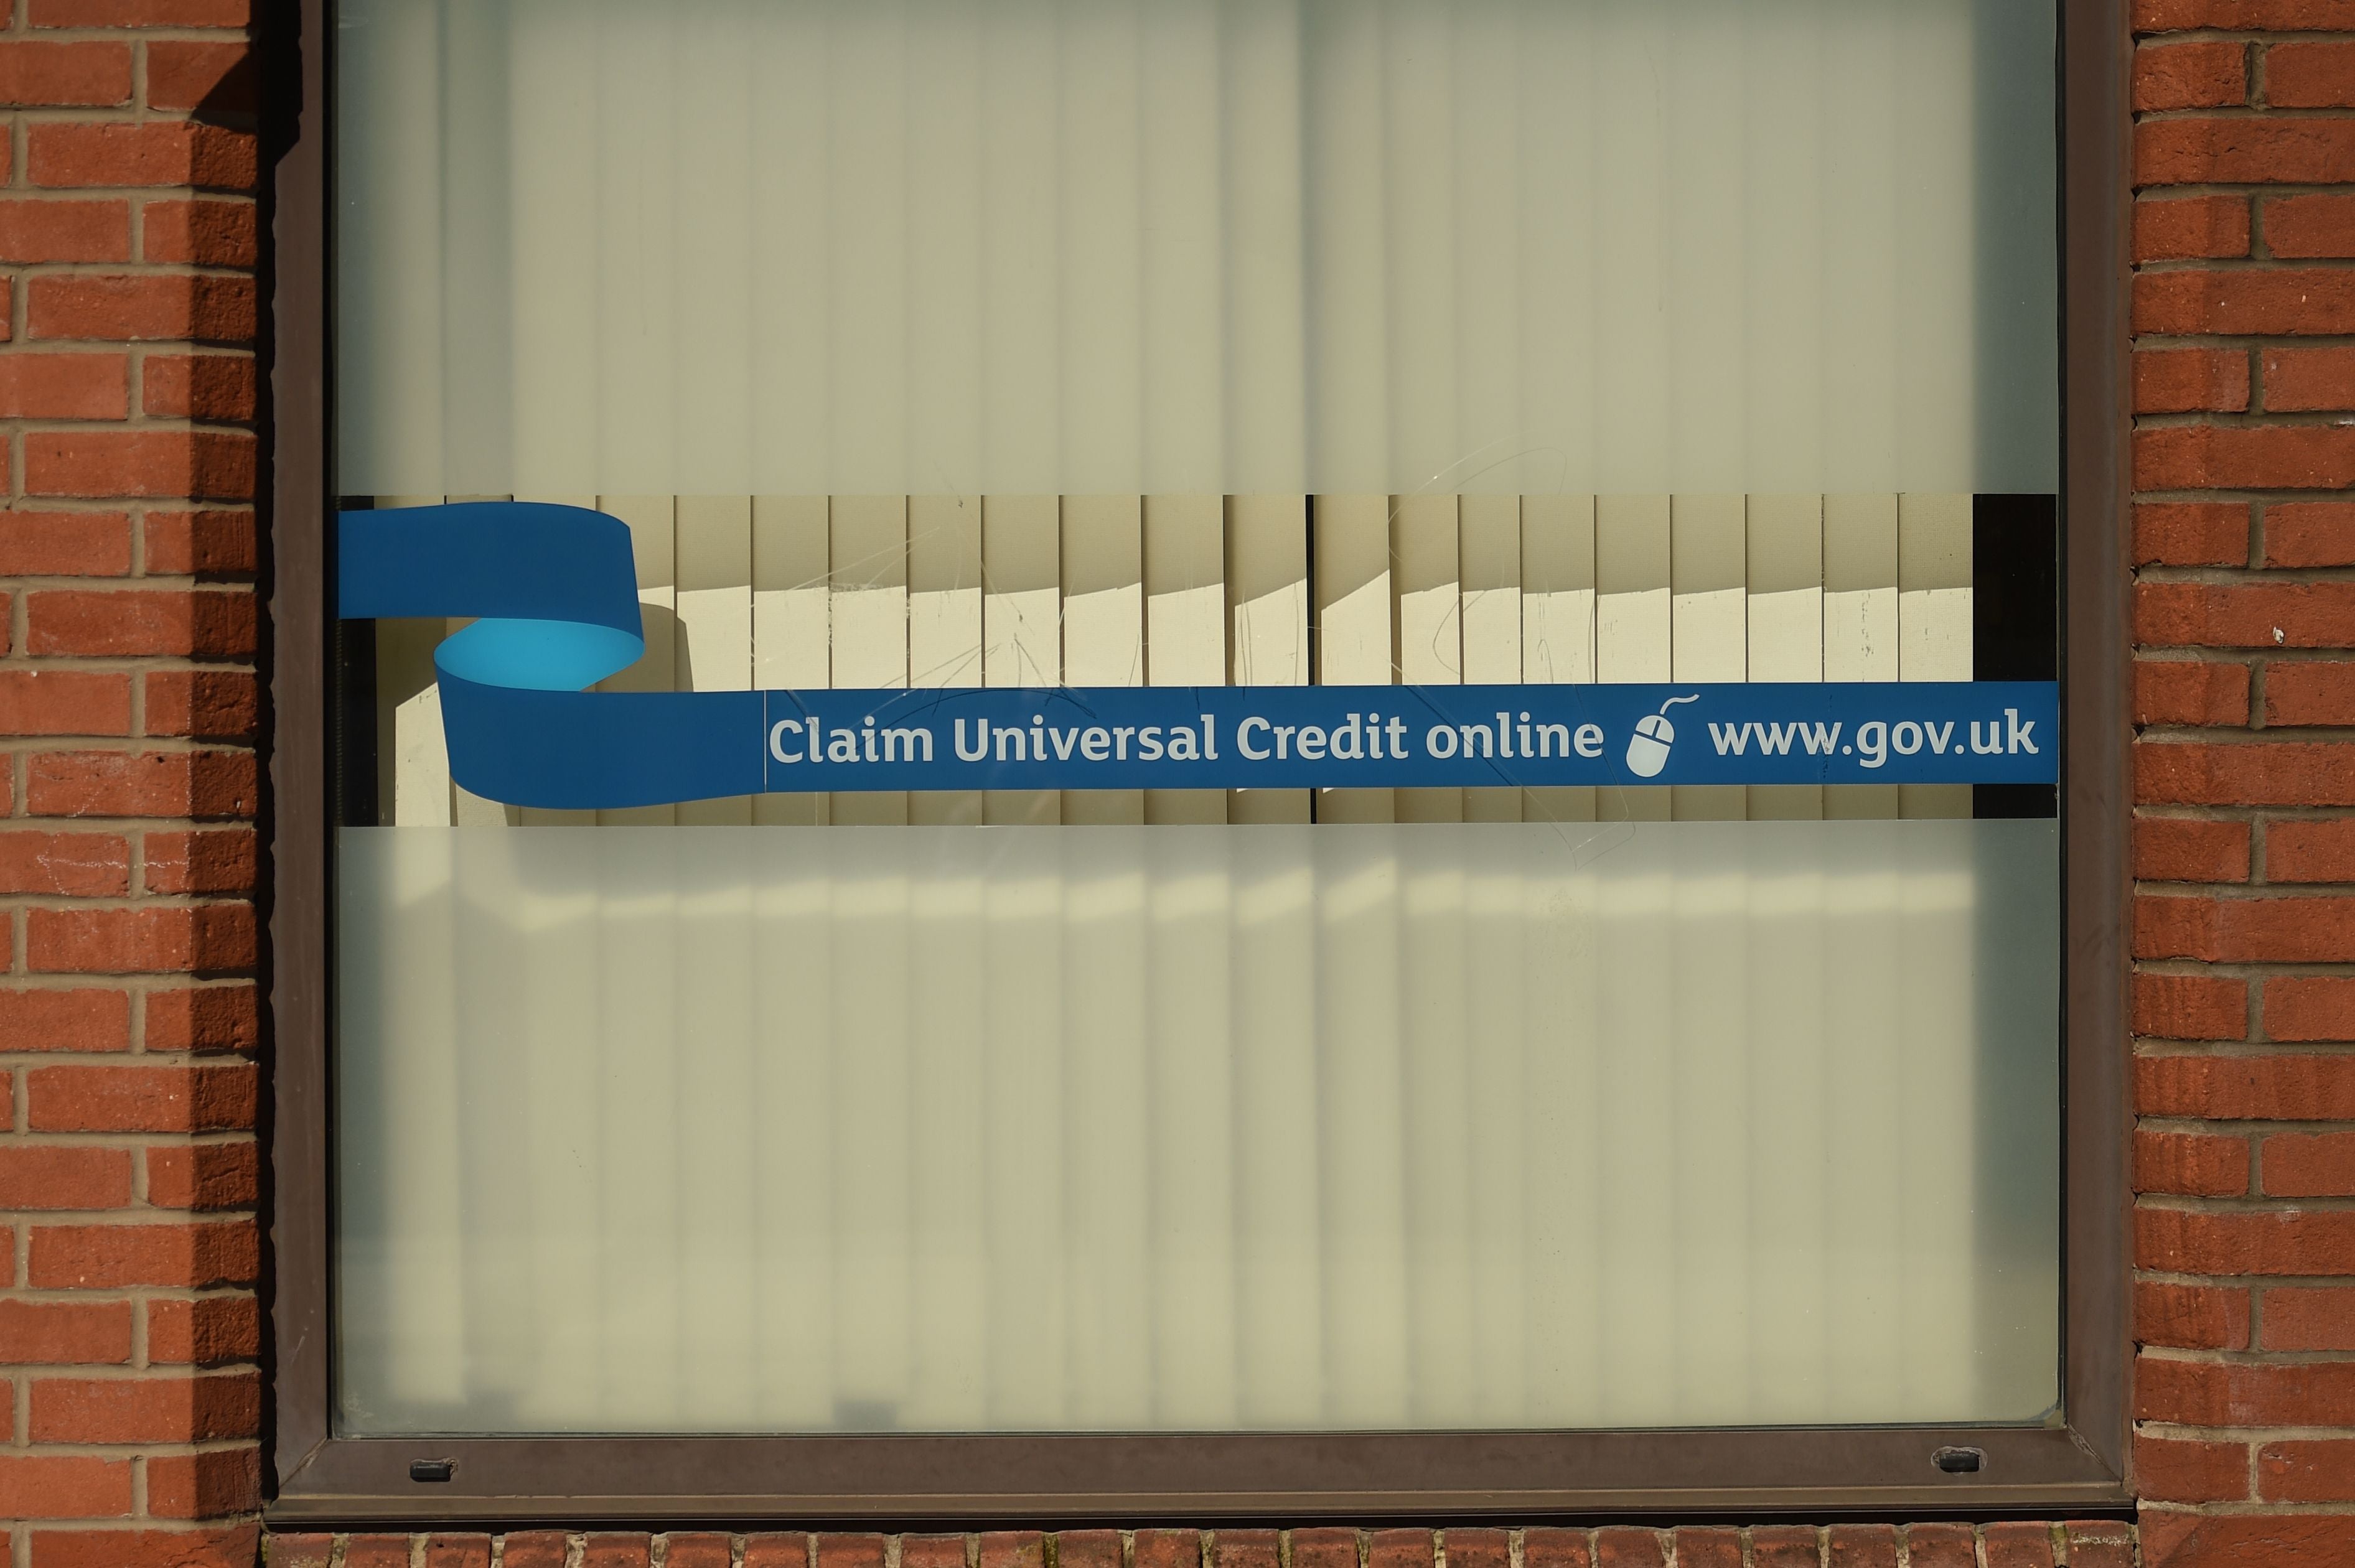 The cut will mean Universal Credit claiments no longer recieve a £20-a-week uplift